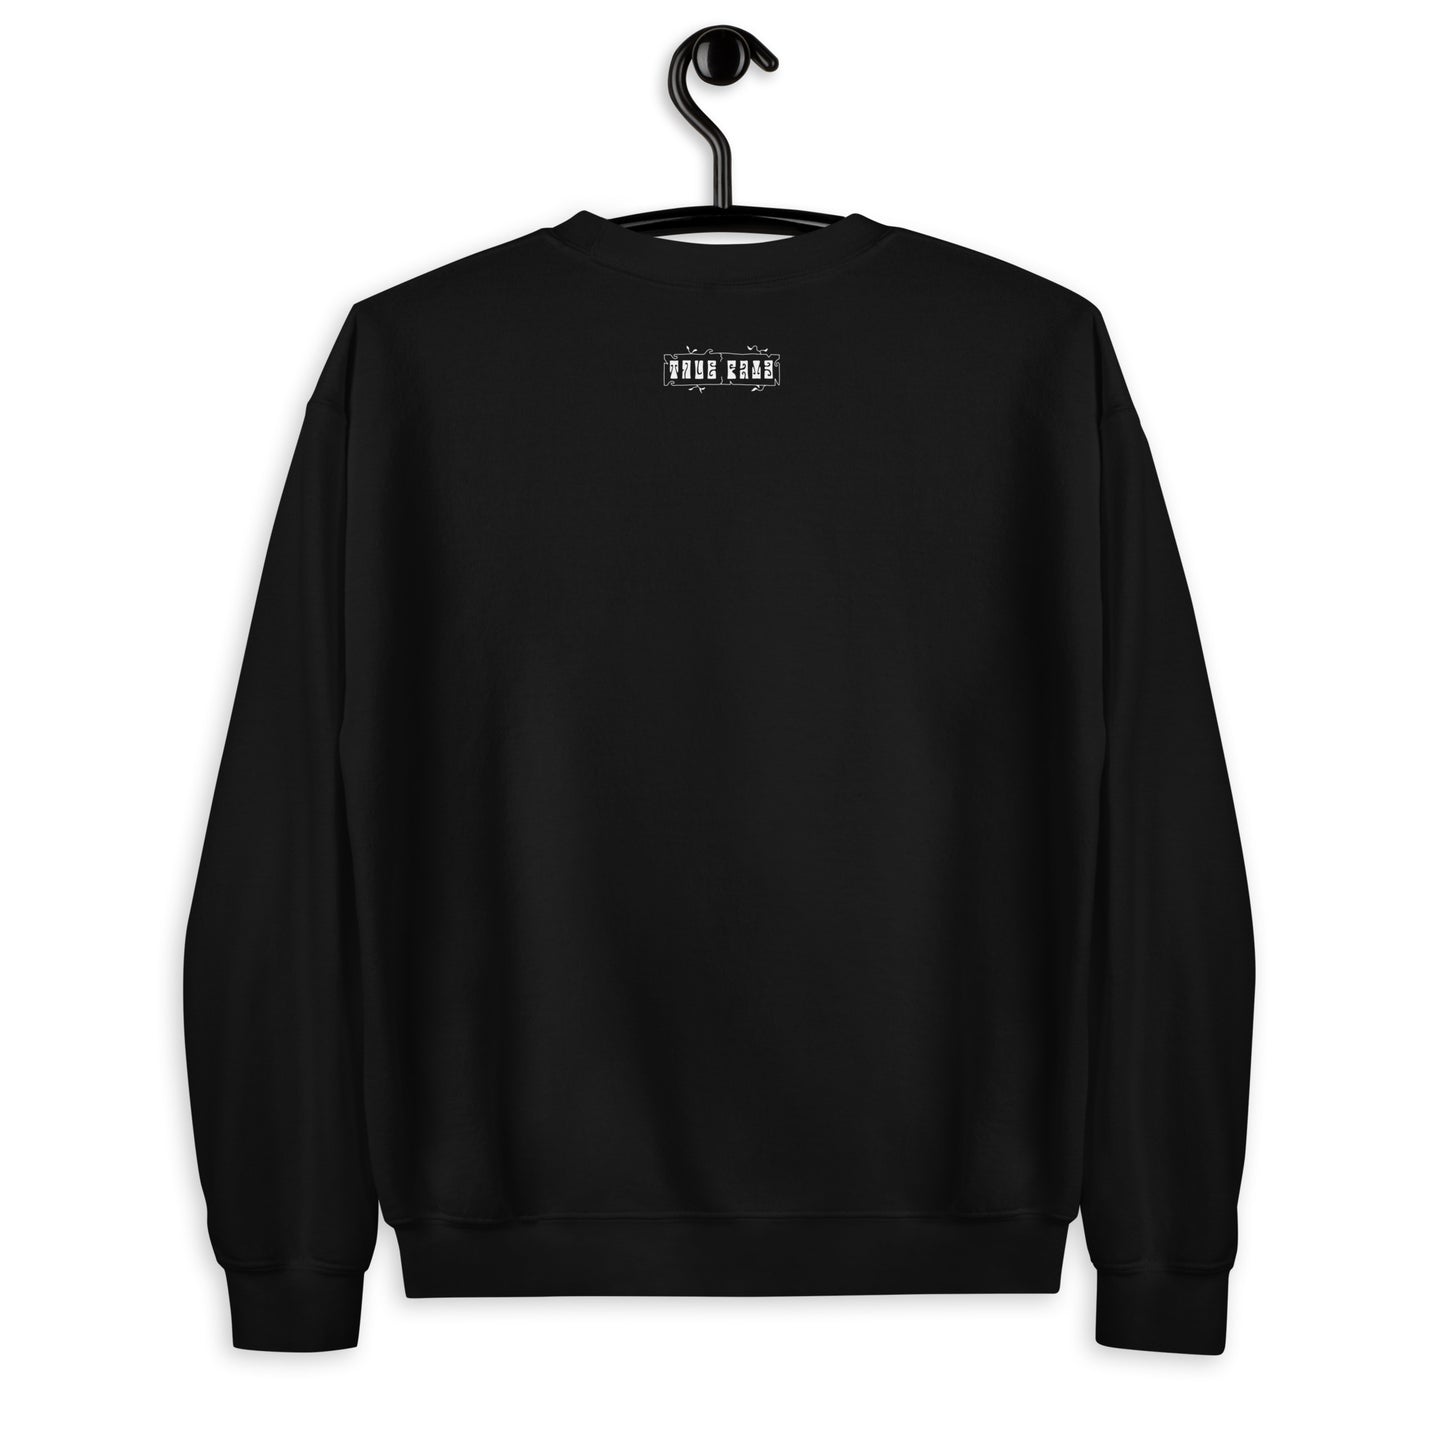 dizzy ouse sweater